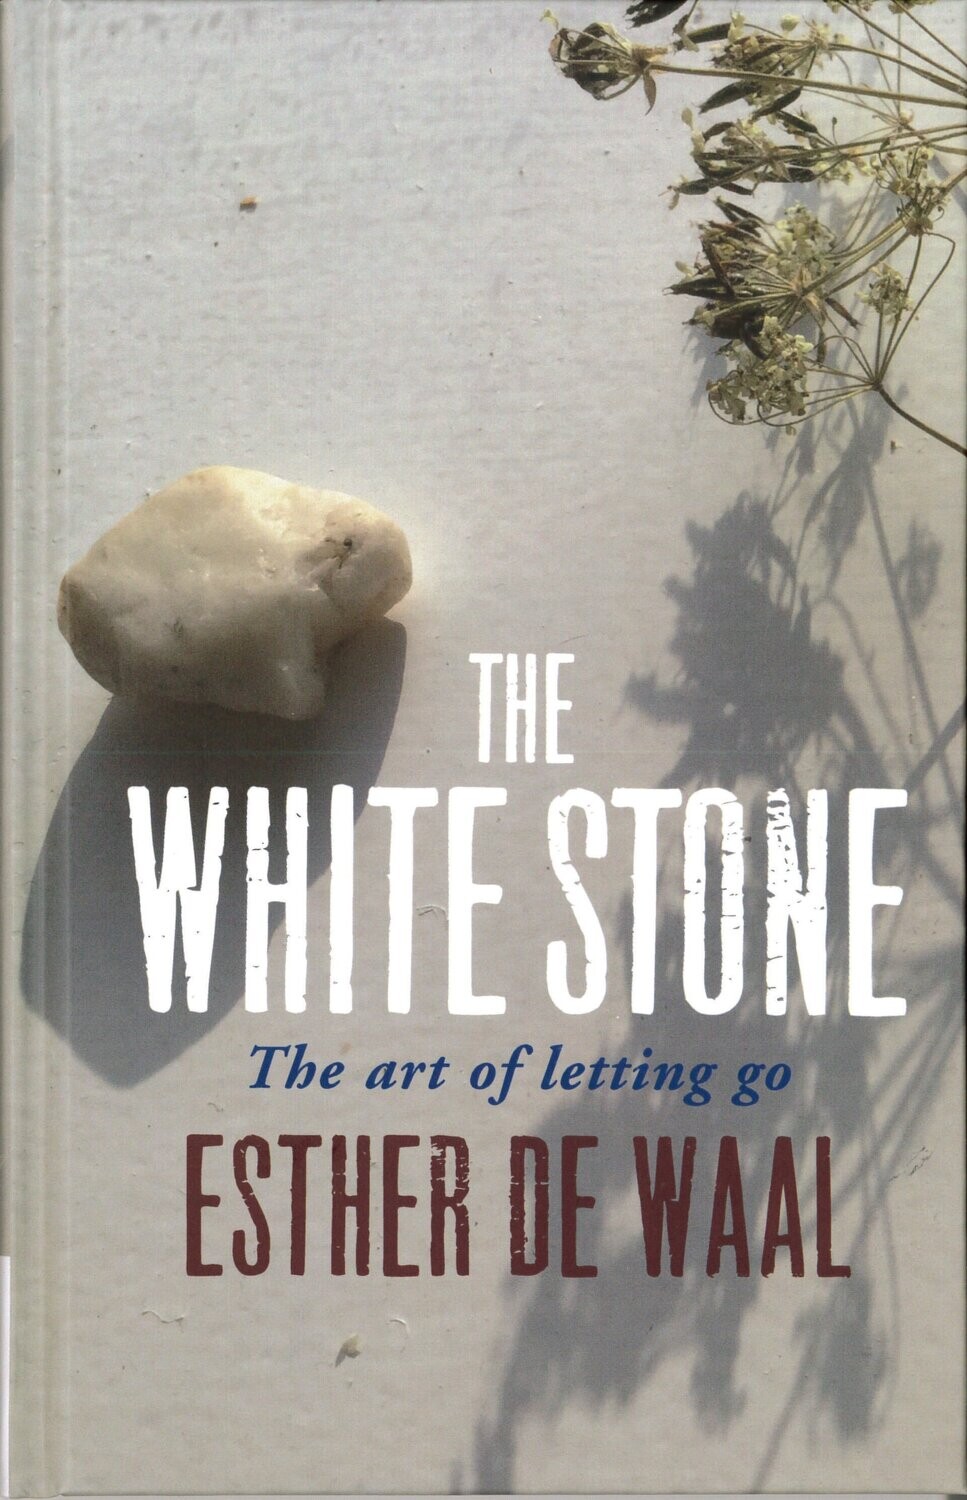 The White Stone: The Art of Letting Go by Esther de Waal